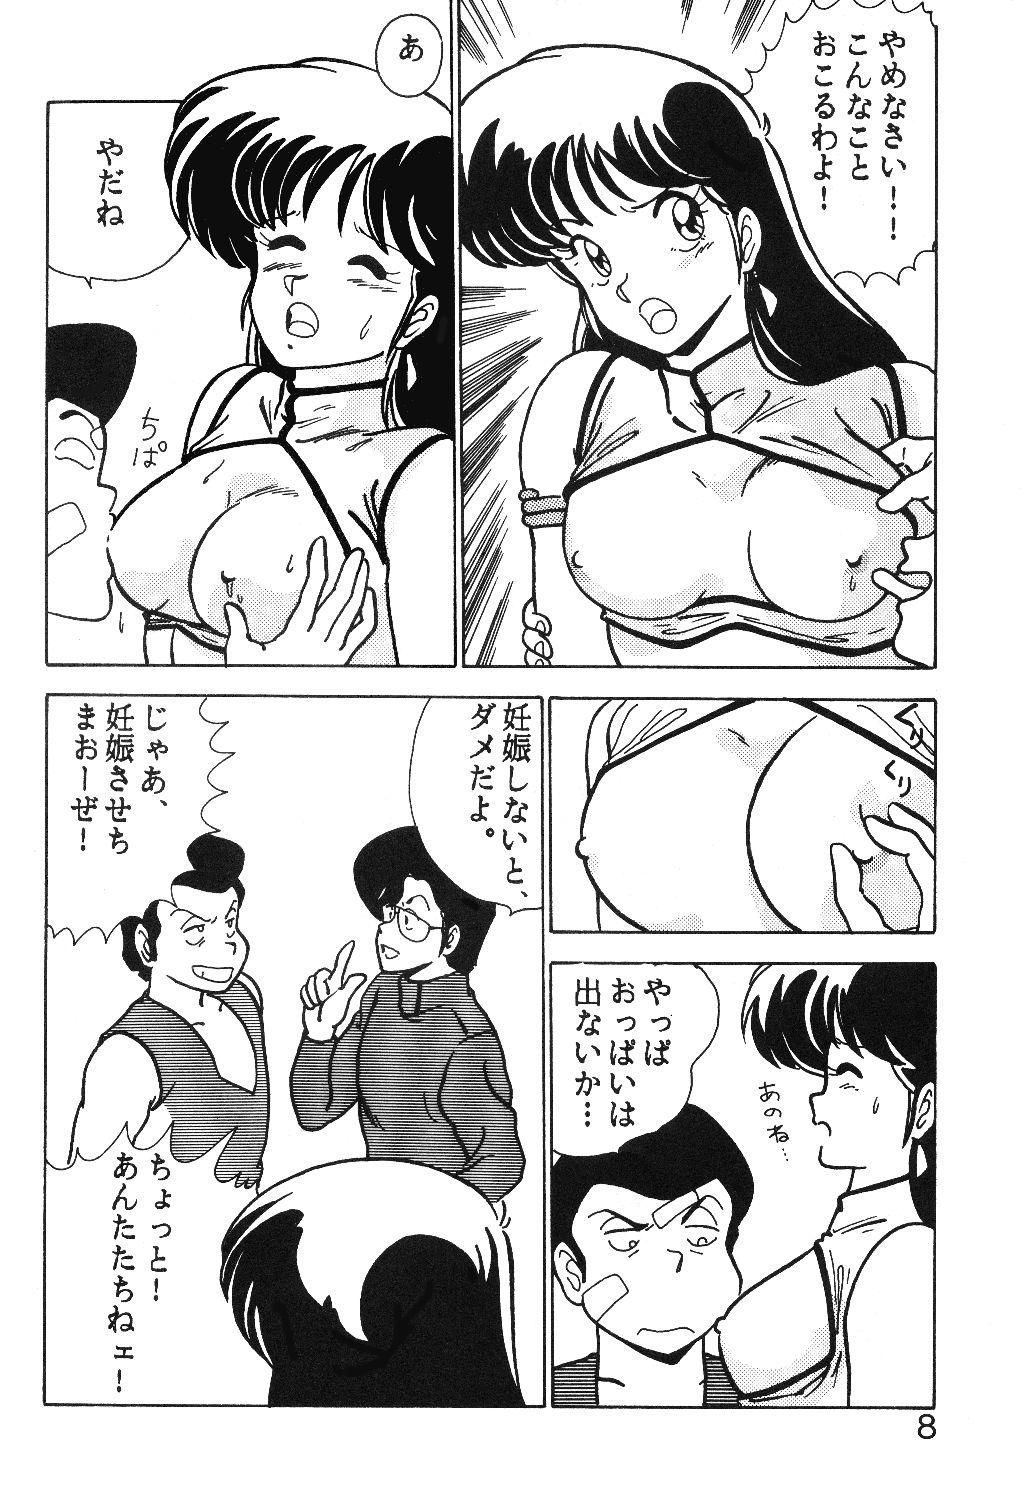 Foreplay Prescription Vol.1 - Dirty pair Gay Youngmen - Page 9